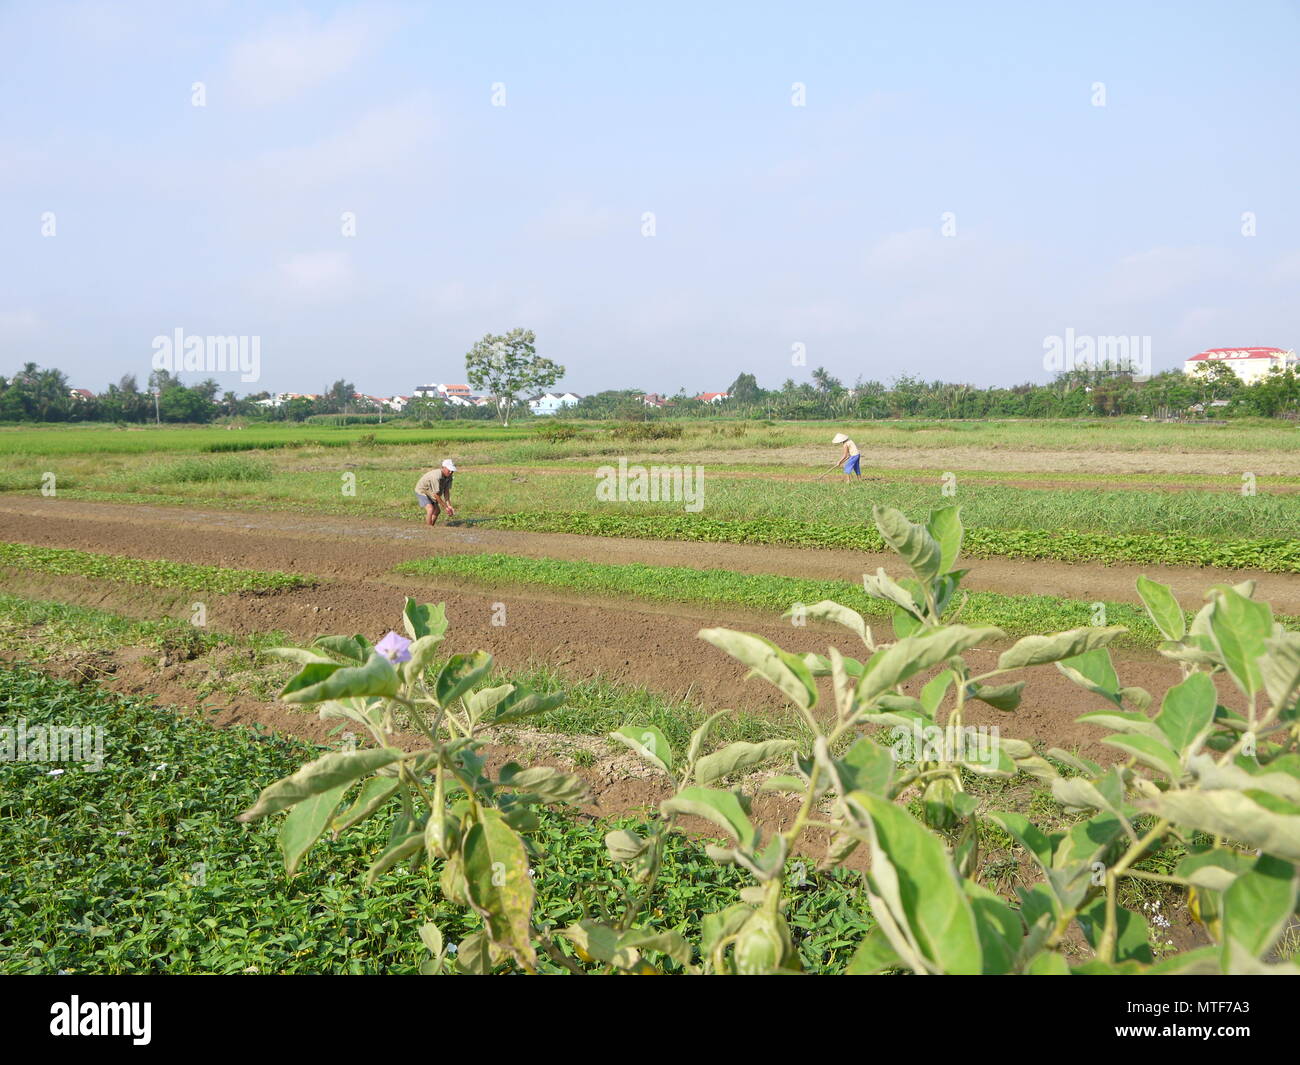 HOI AN, VIETNAM - 18TH MARCH 2018: Farmers working,raking, watering by hands in peanut field early morning in Hoi An Stock Photo